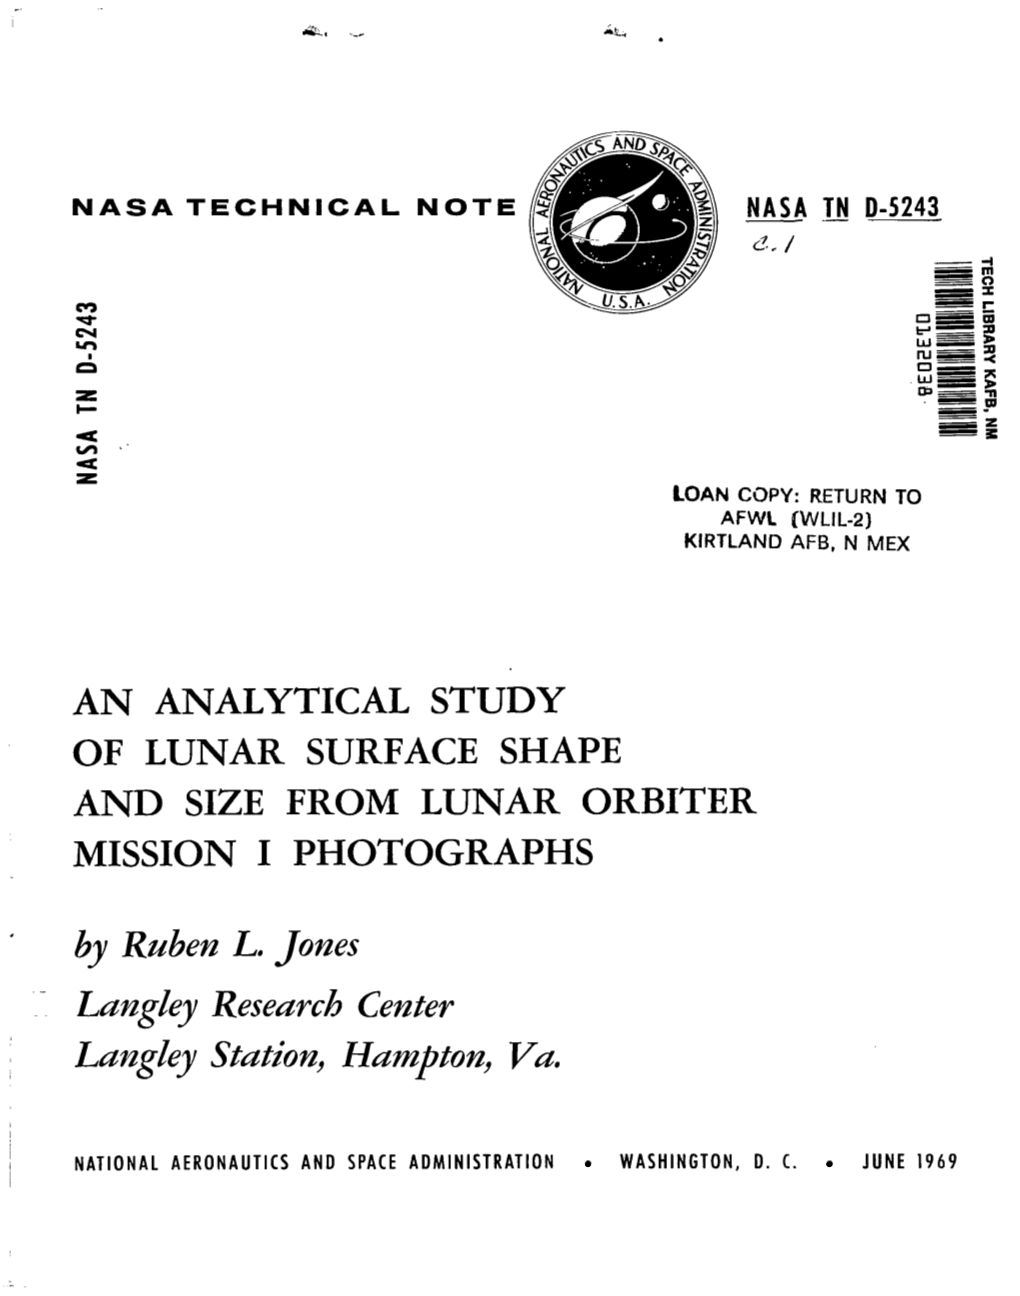 An Analytical Study of Lunar Surface Shape and Size from Lunar Orbiter Mission I Photographs